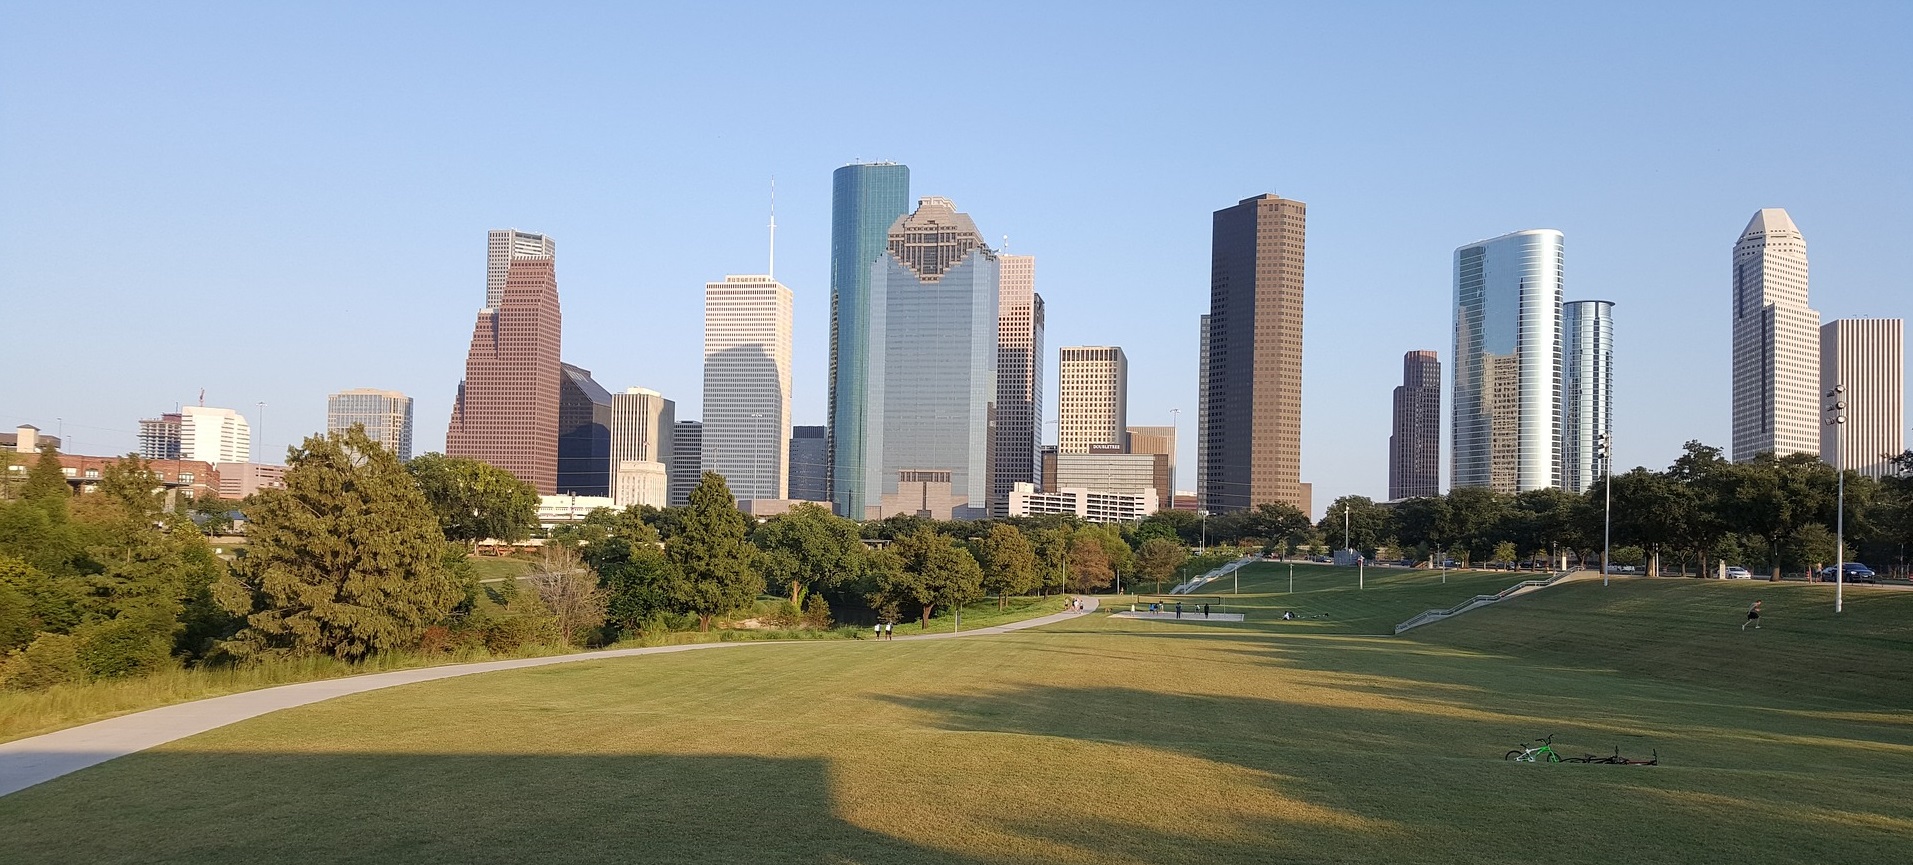 A view of the Houston skyline